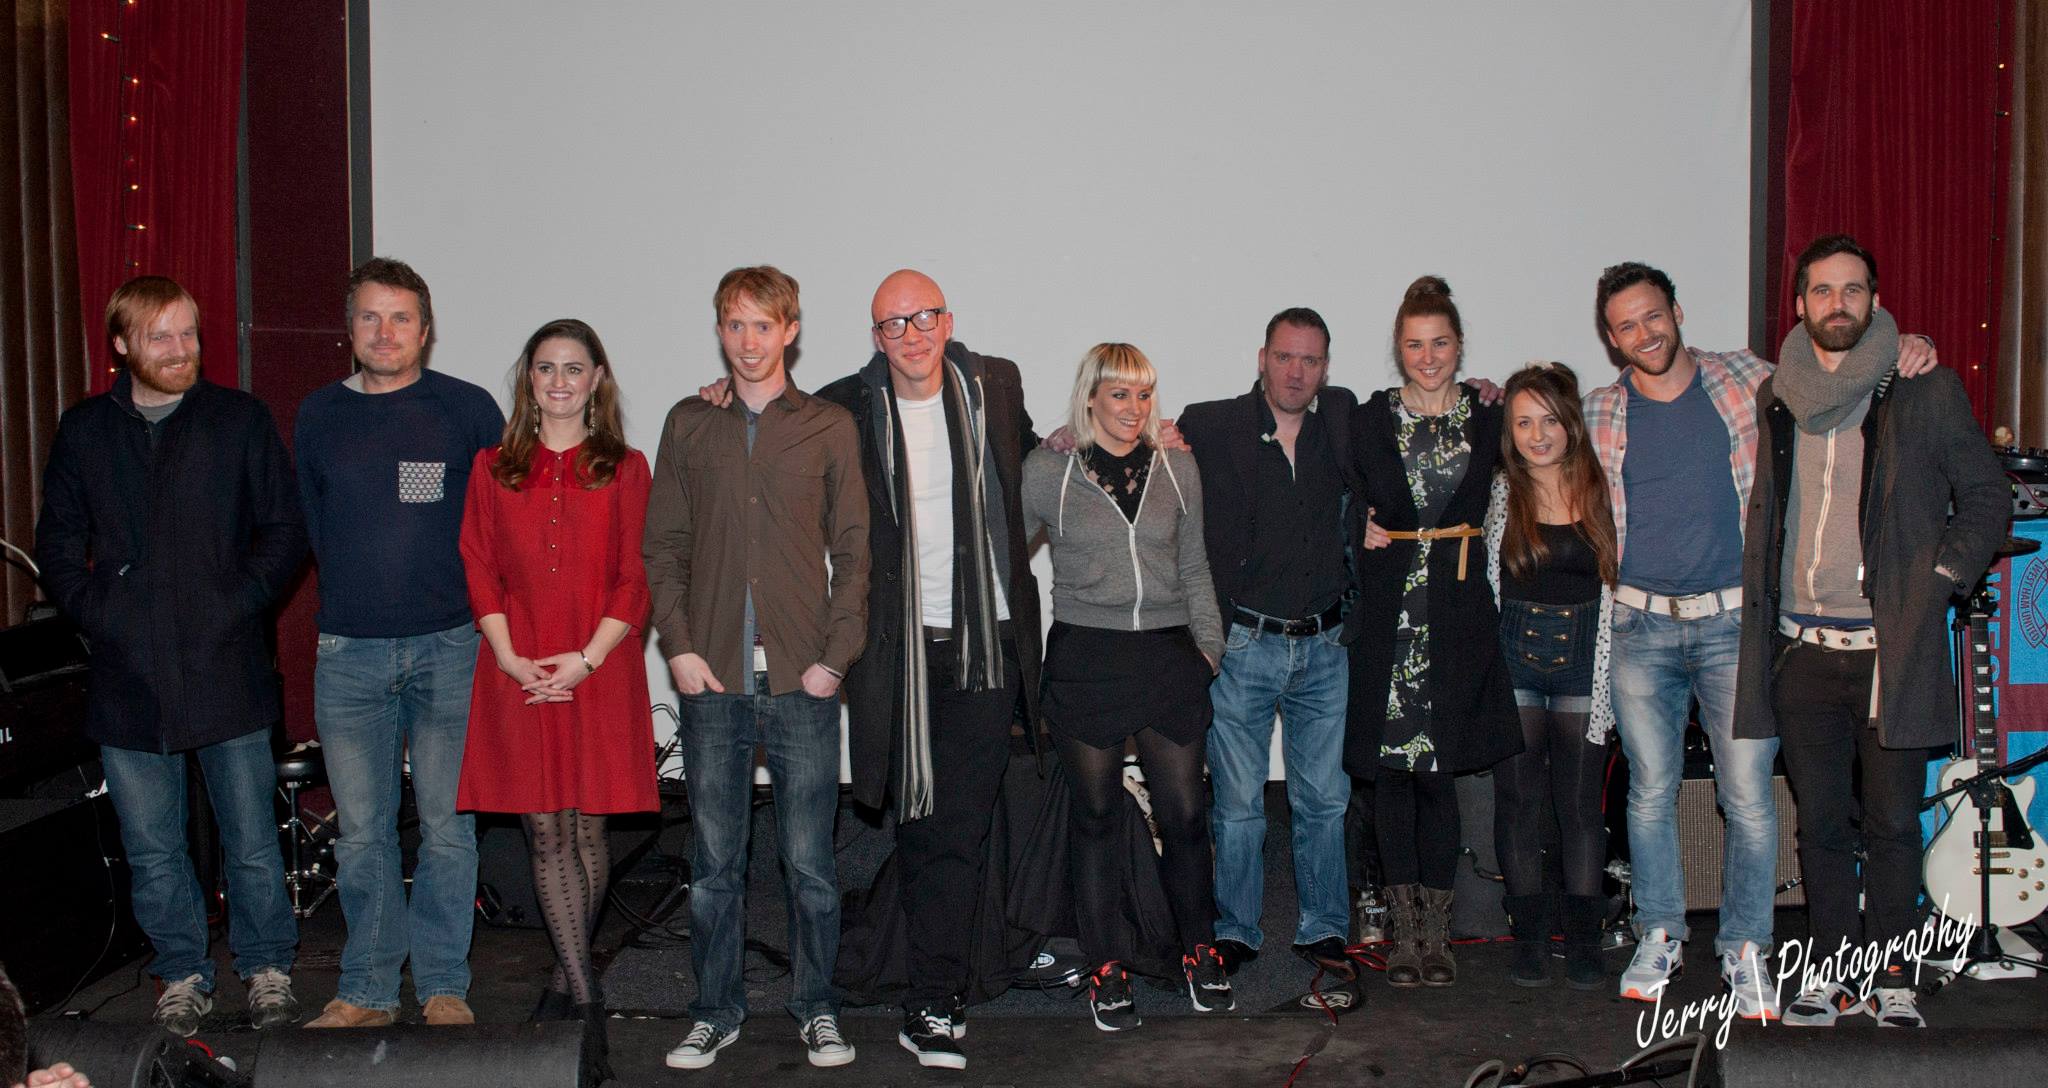 Cast and crew of Limp. at the Dublin screening February 2014